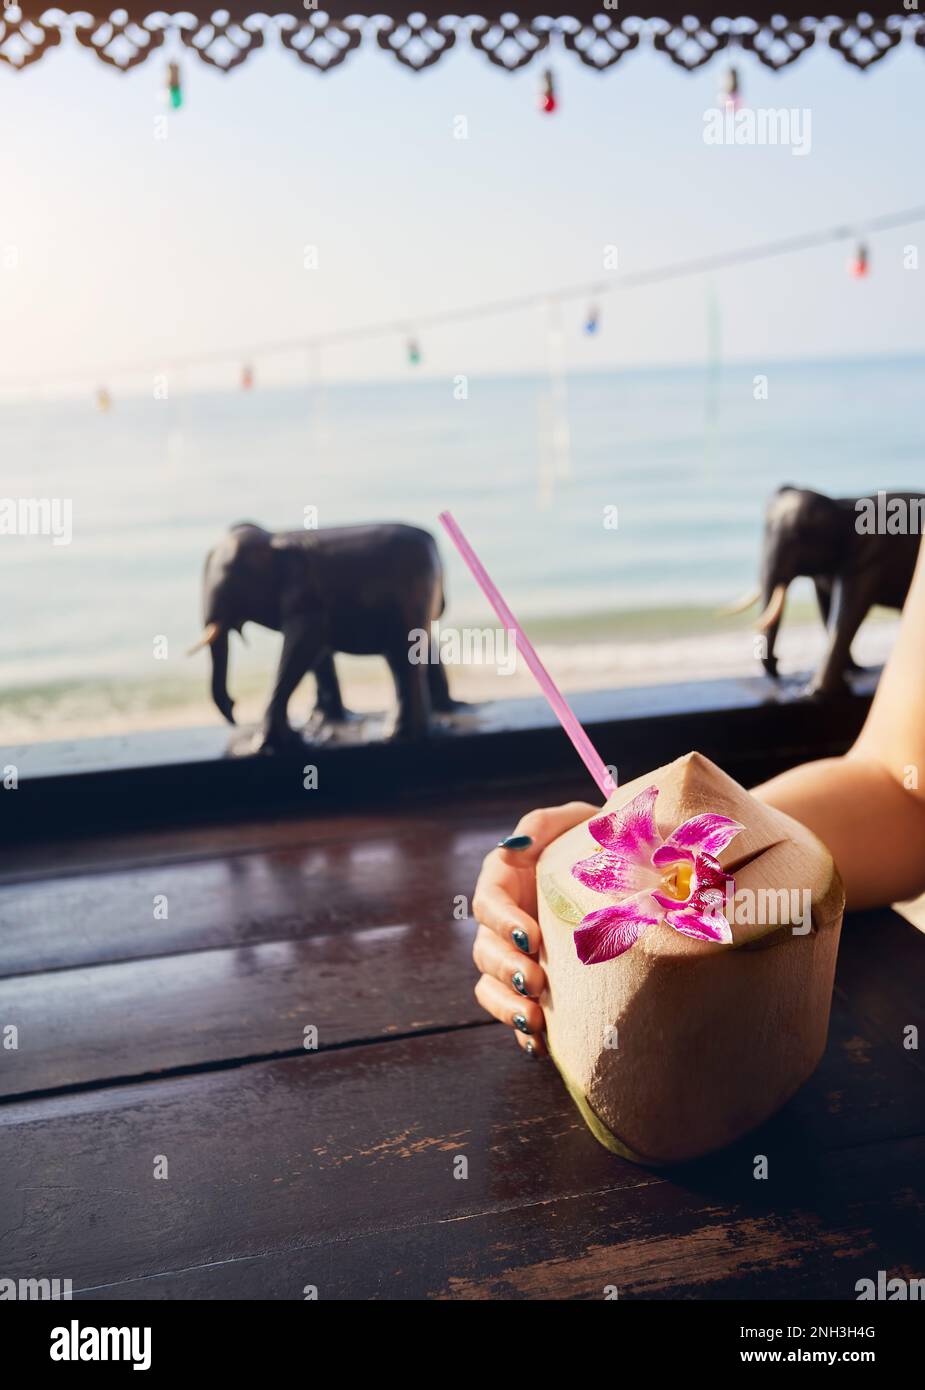 Woman drinks sweet fresh coconut with straw at restaurant with wooden elephants decoration on the beach with view of ocean at sunrise. Stock Photo